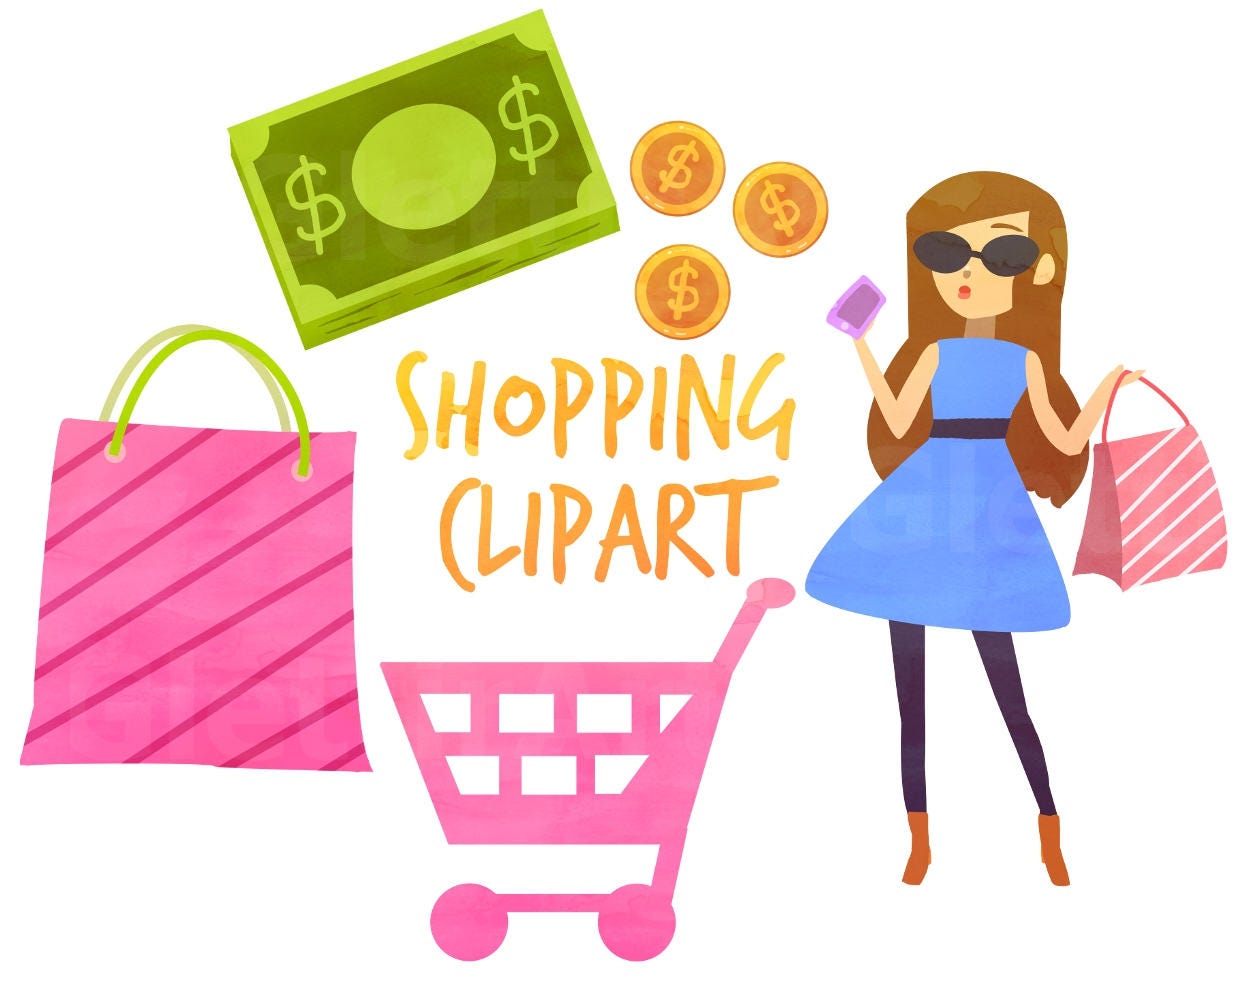 Shopping Clipart, Fashion Clipart, Shopping Bags Clipart, for personal and  commercial use, instant download, scrapbooking, planner stickers